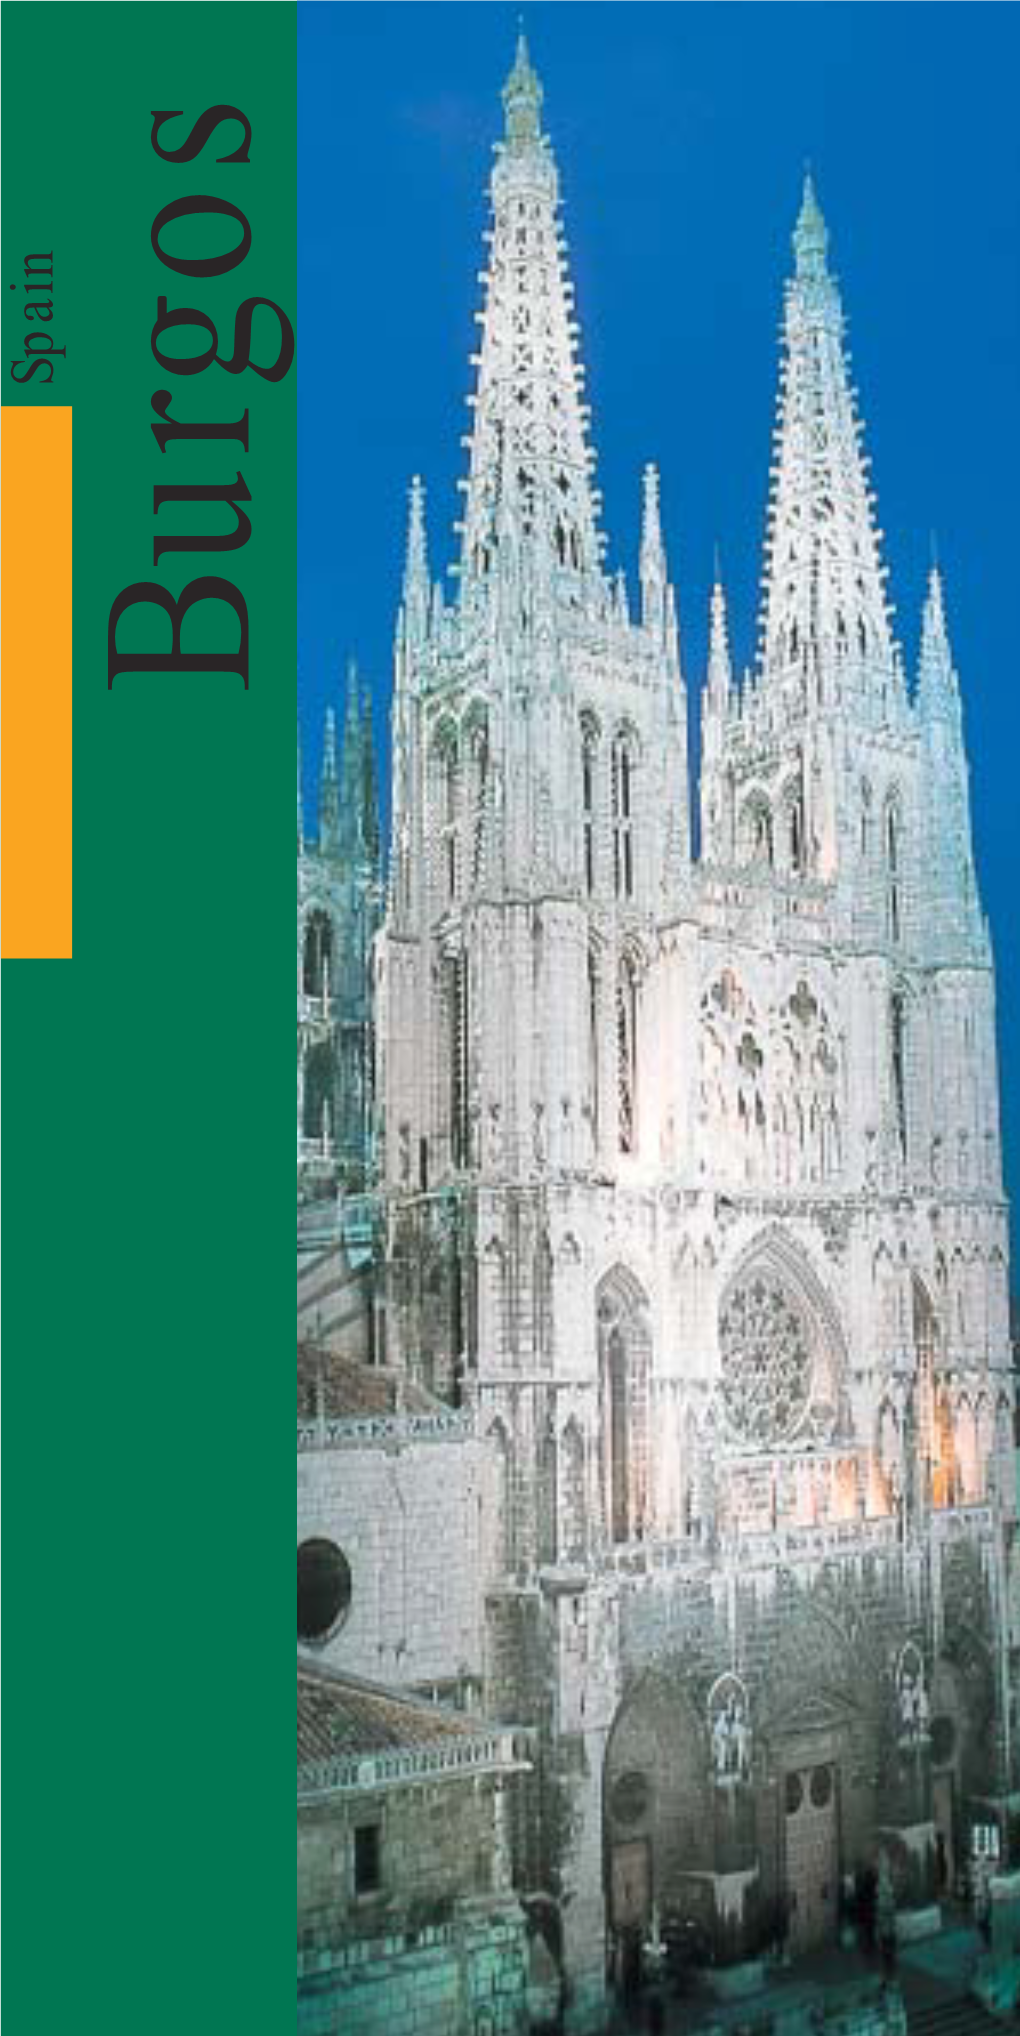 Guide to the City of Burgos